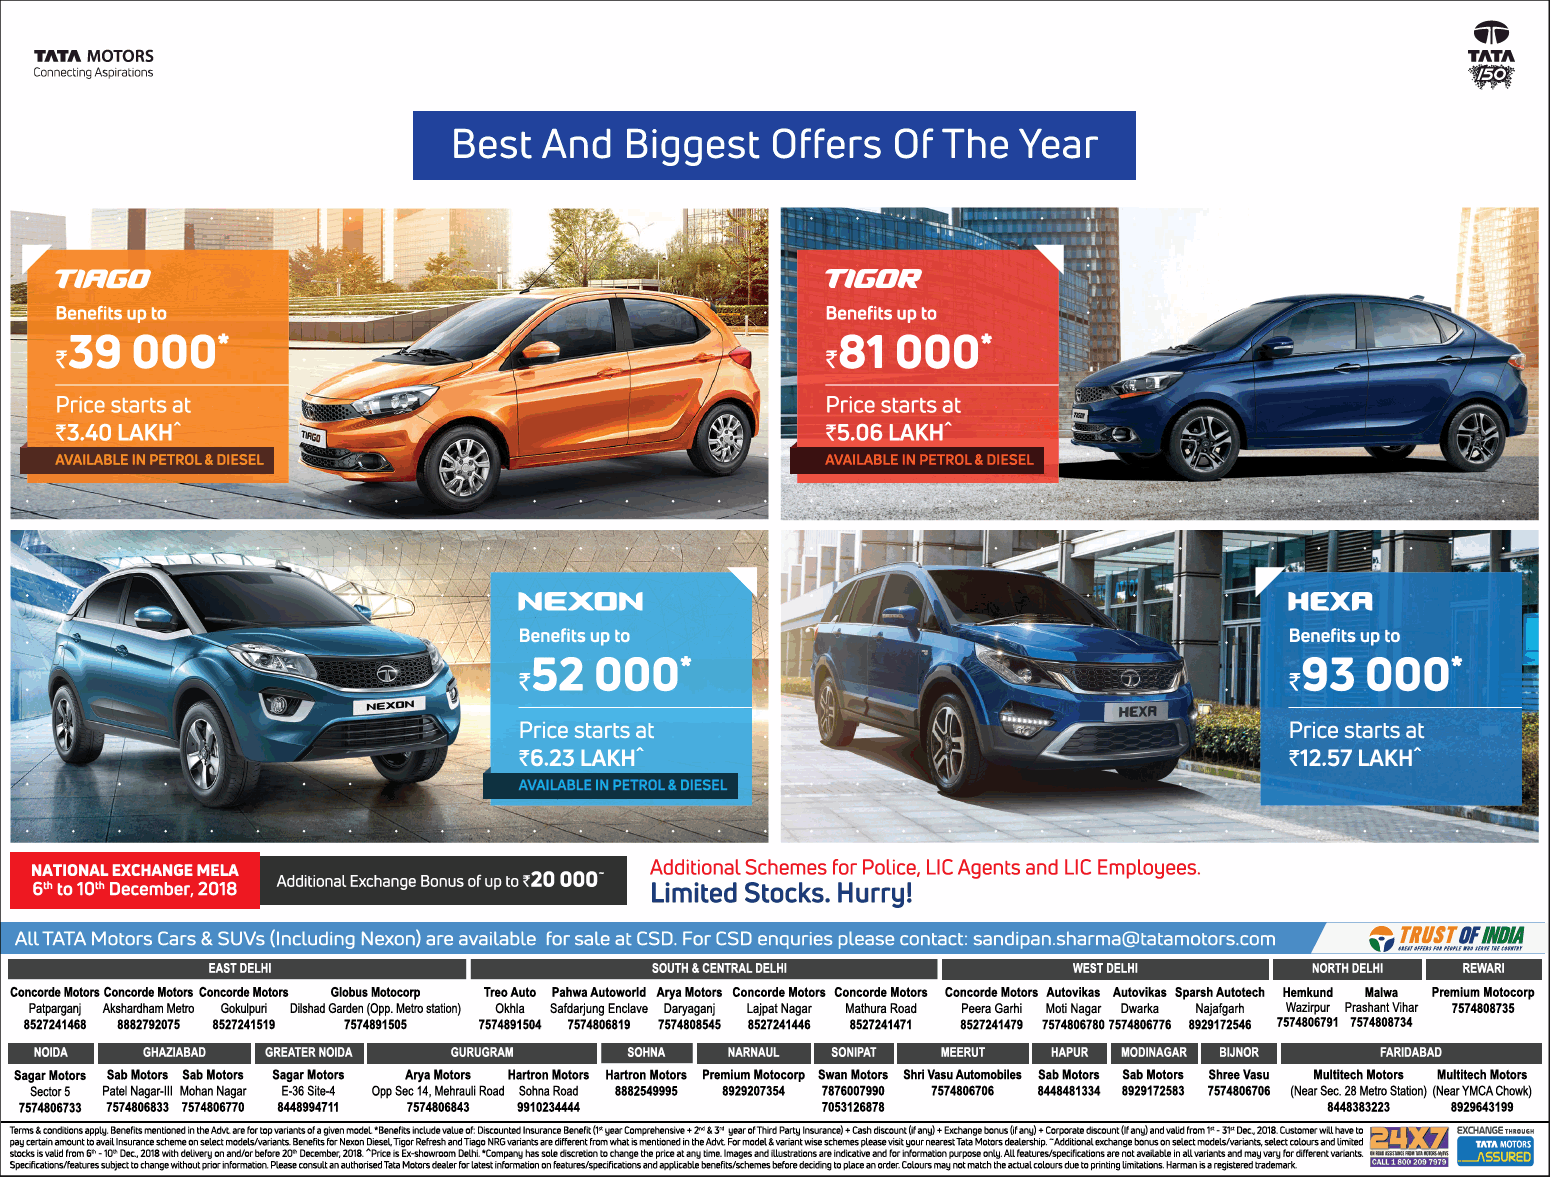 tata-motors-best-and-biggest-offers-of-the-year-ad-delhi-times-09-12-2018.png